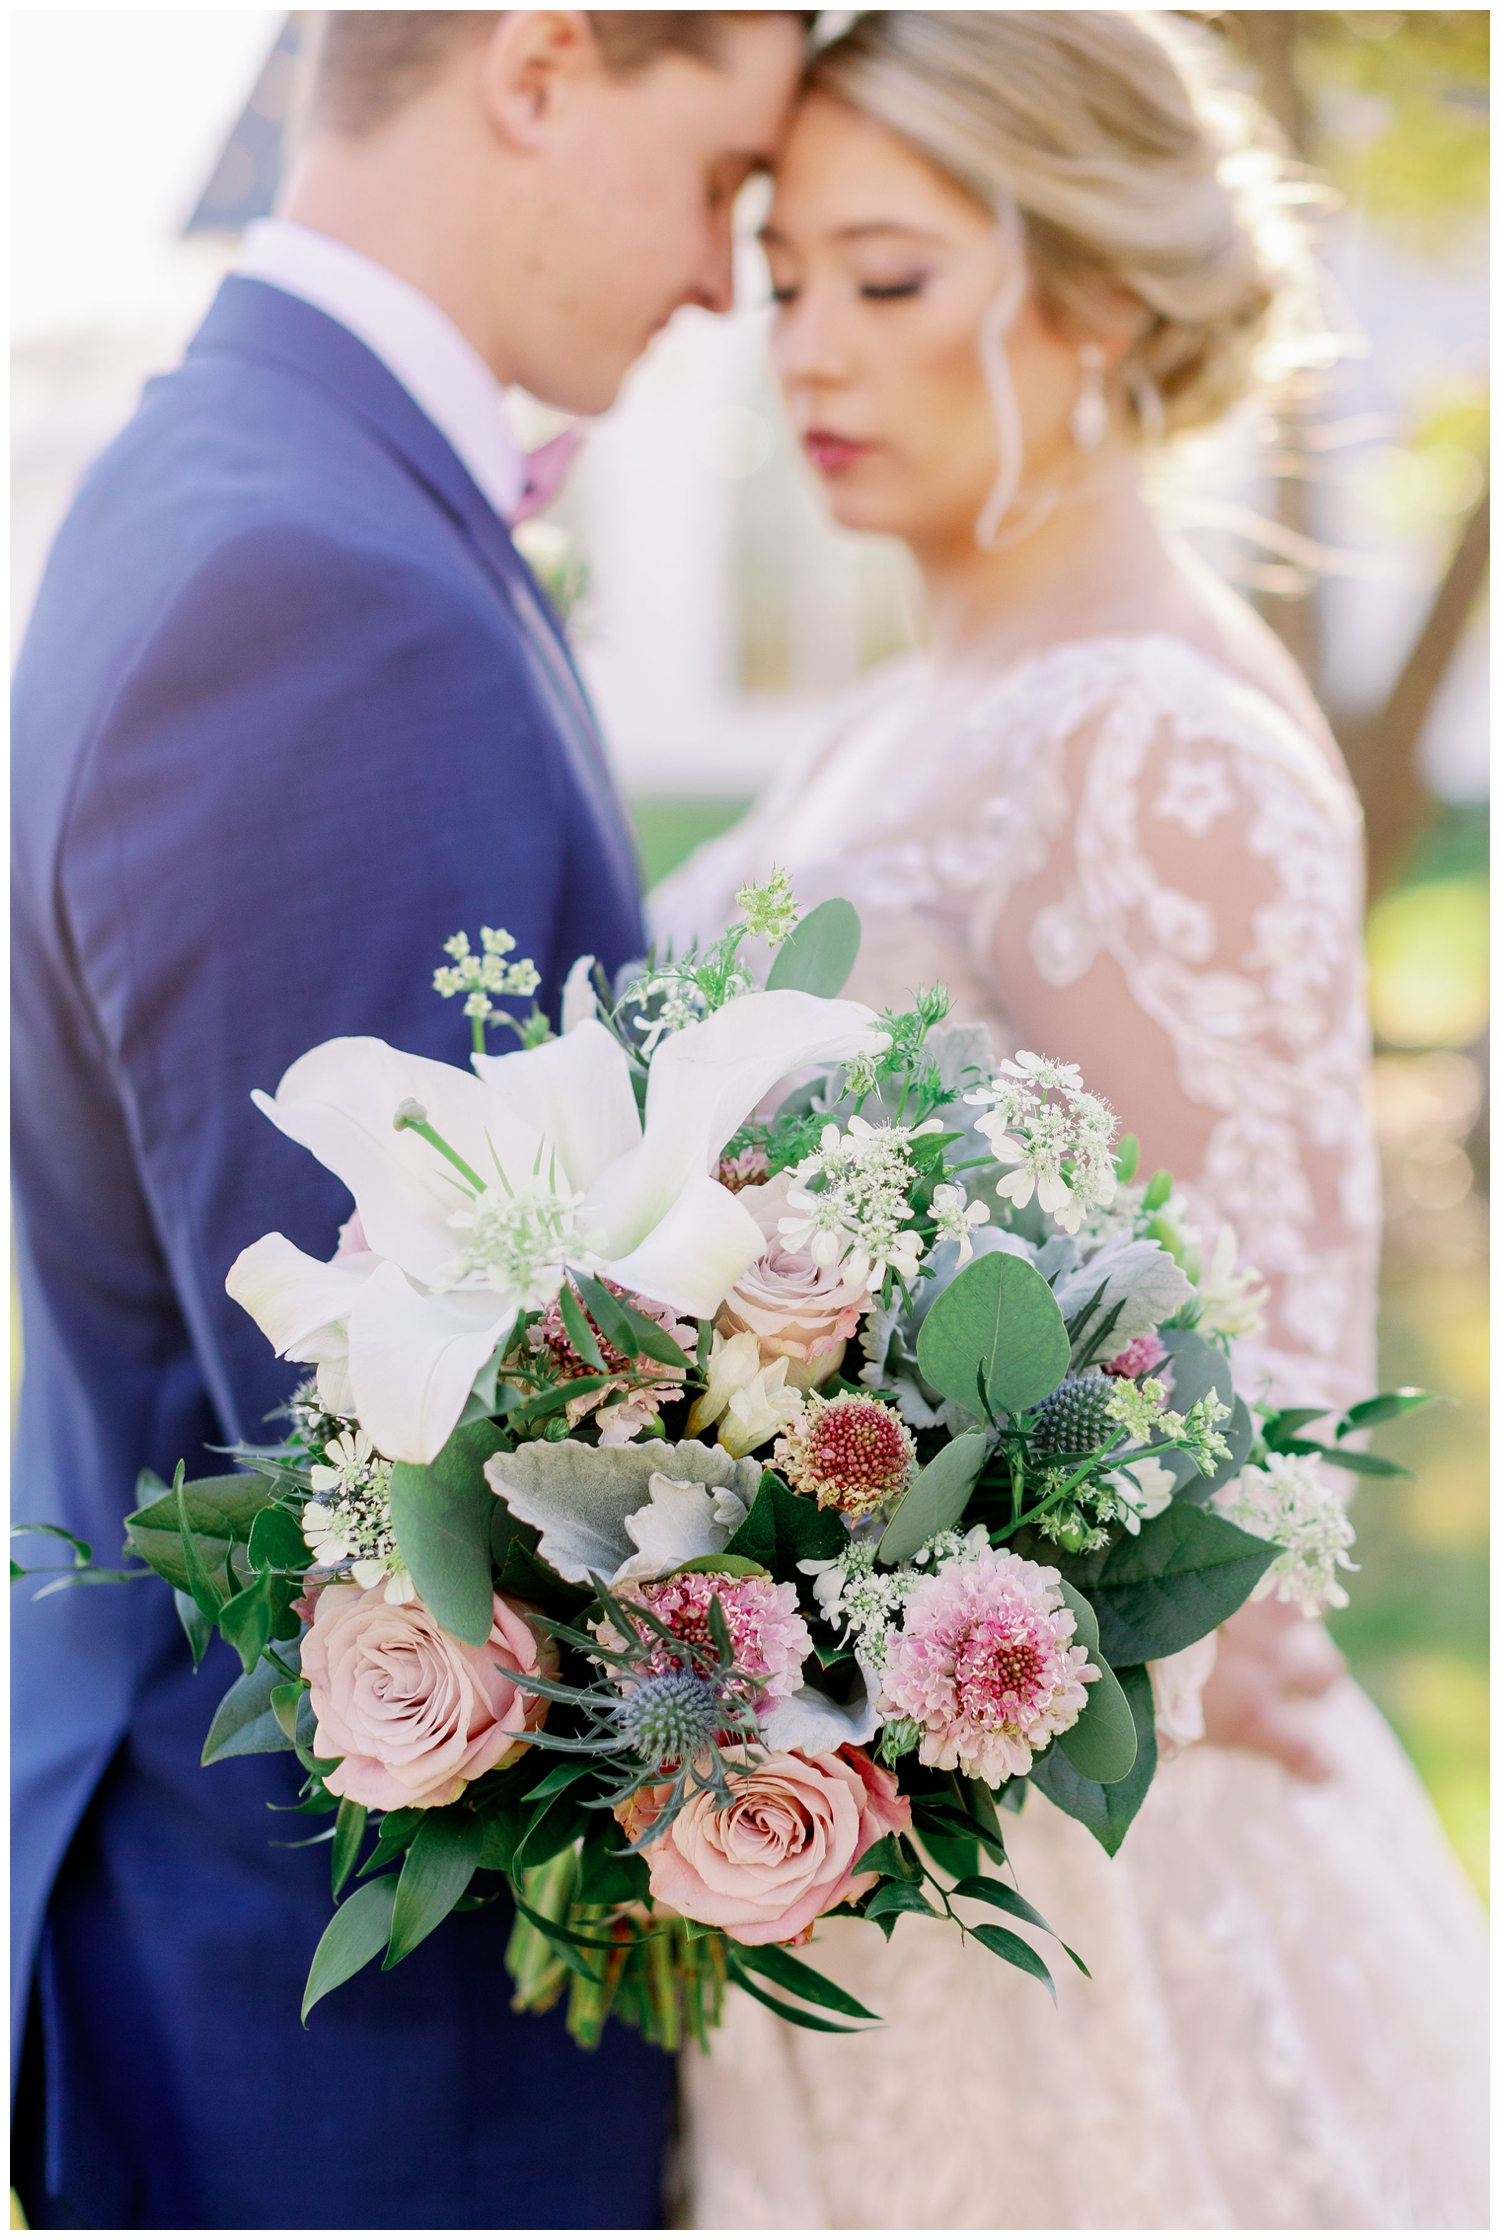 pink and white bouquet in foreground with bride groom in background